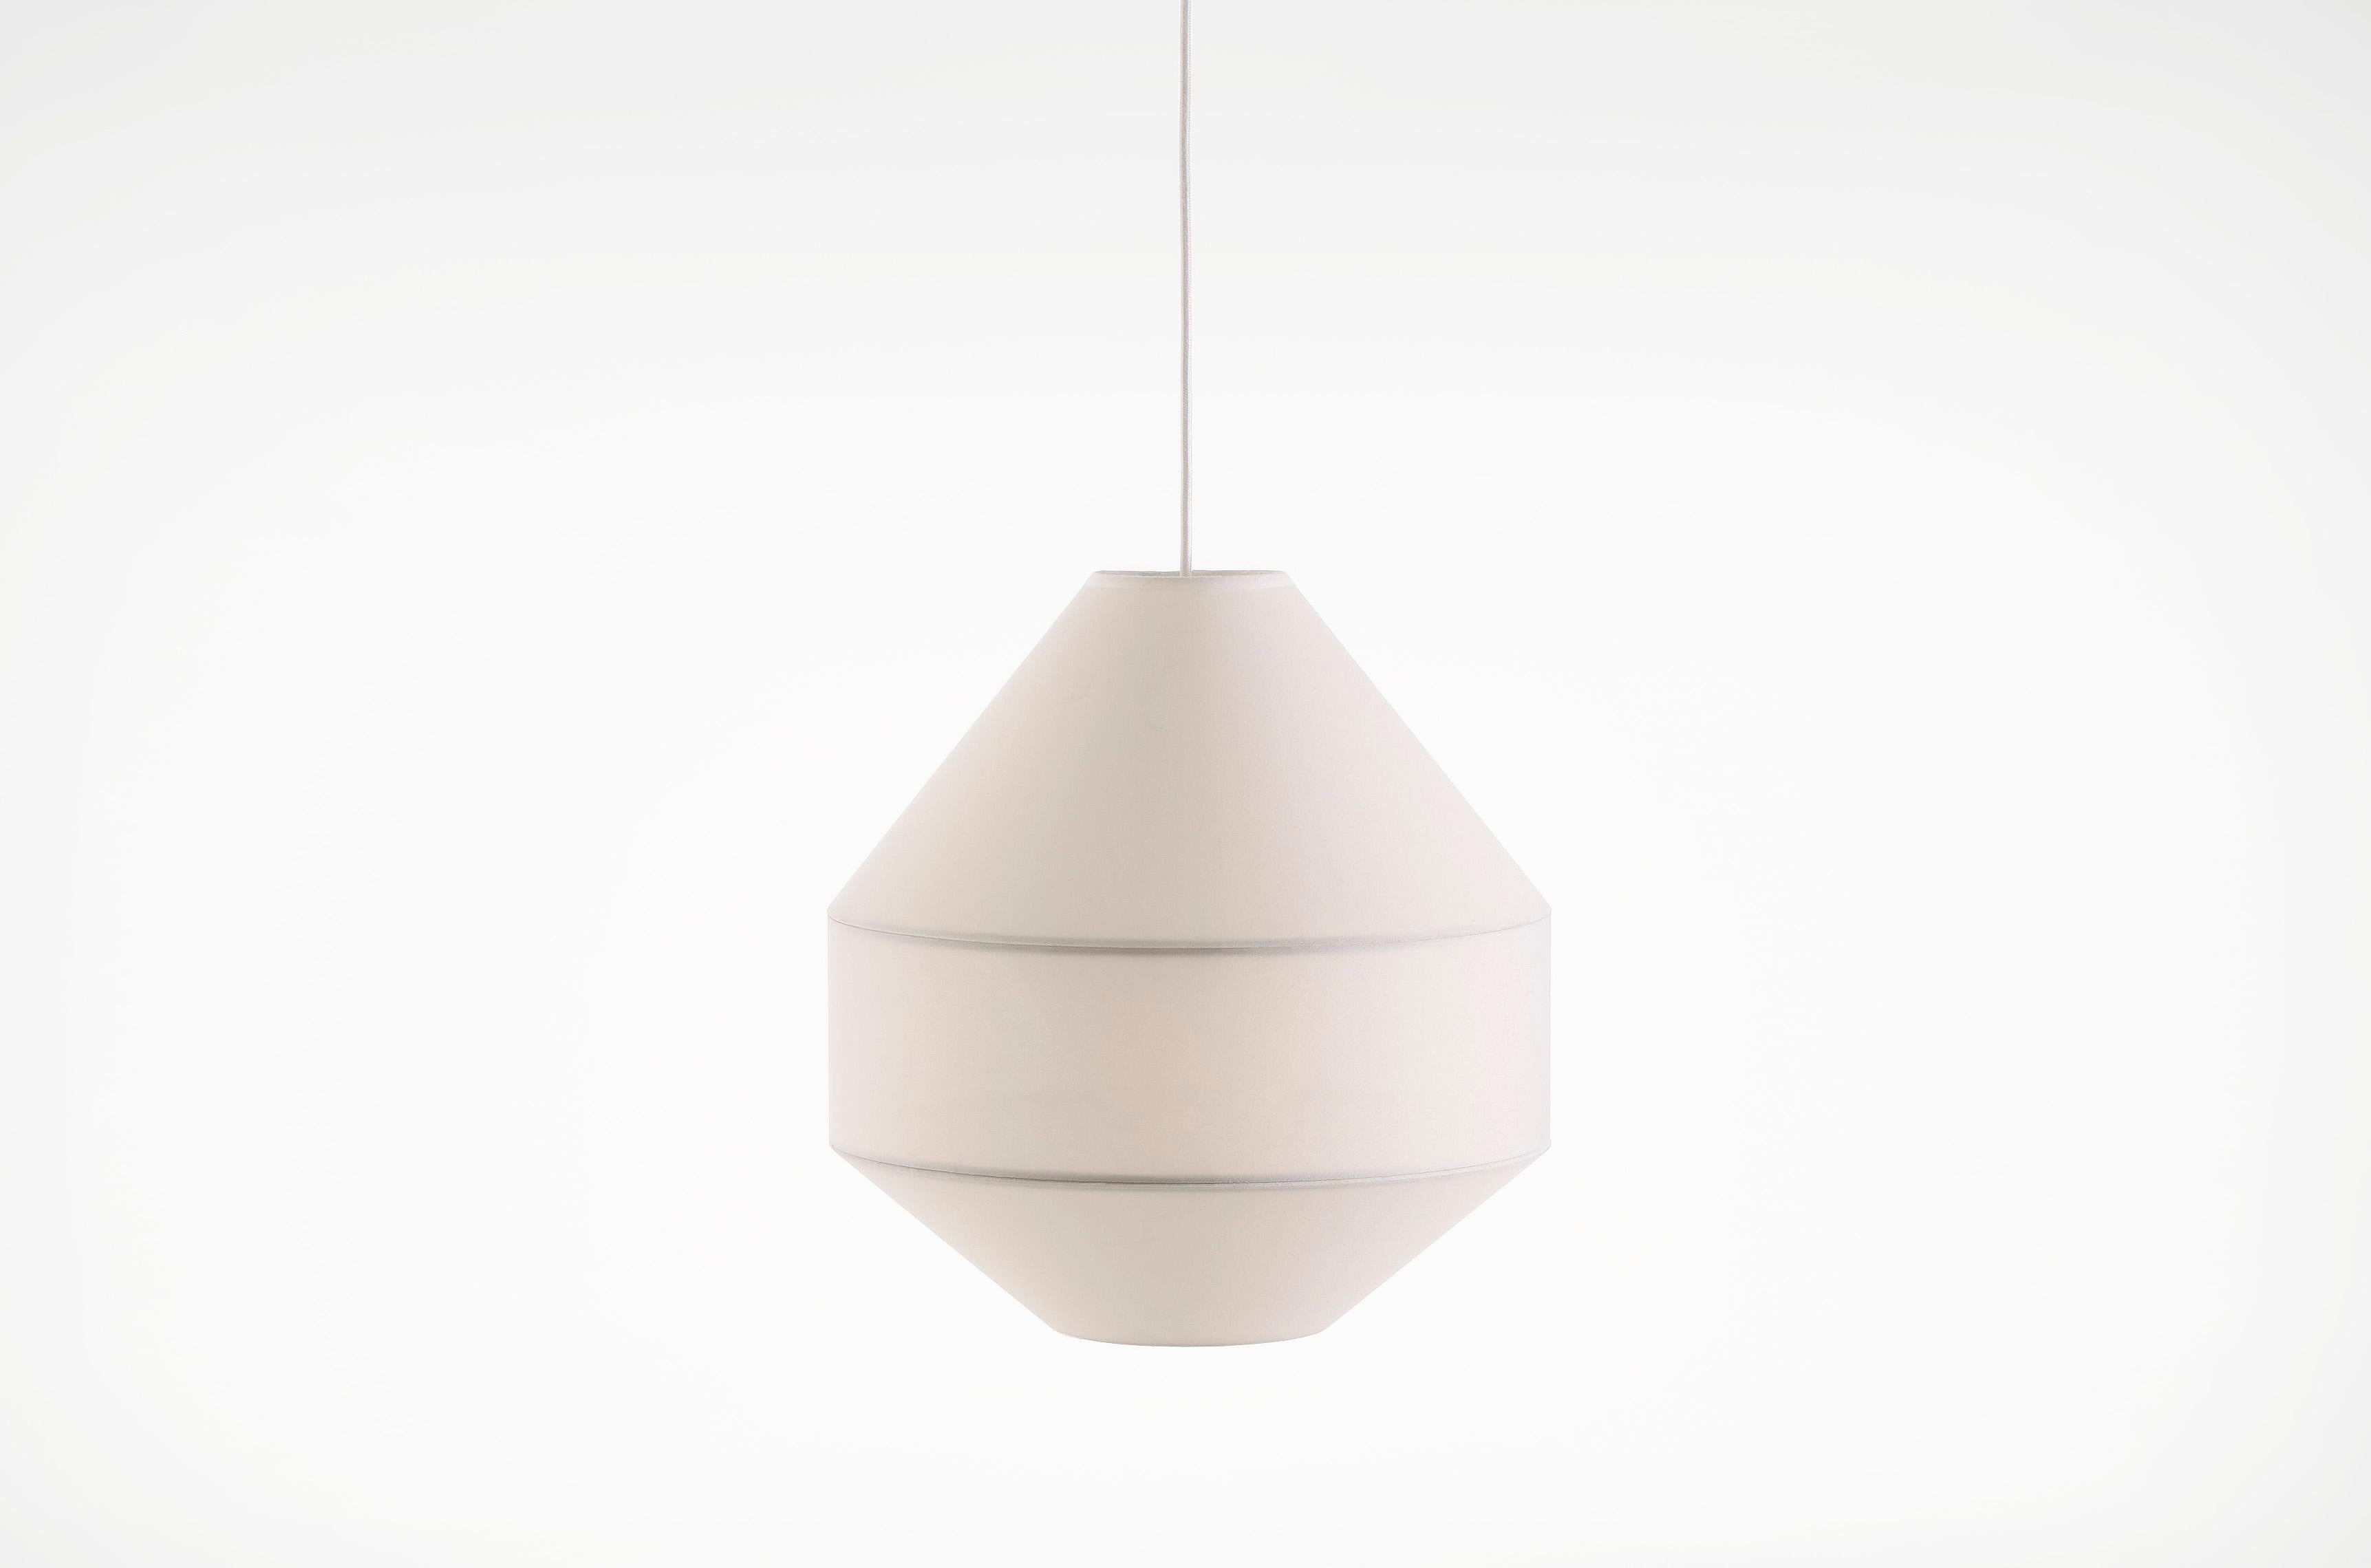 Mayu 01 Pendant Light by Coco Flip
Dimensions: D 38 x W 38 x H 40 cm
Materials: White mesh fabric on transparent backing. 
Weight: 1.2kg

Standard fixtures included
Pendants:
1 x 80mm Ø ceiling canopy (white)
Black also available on request
2 metres